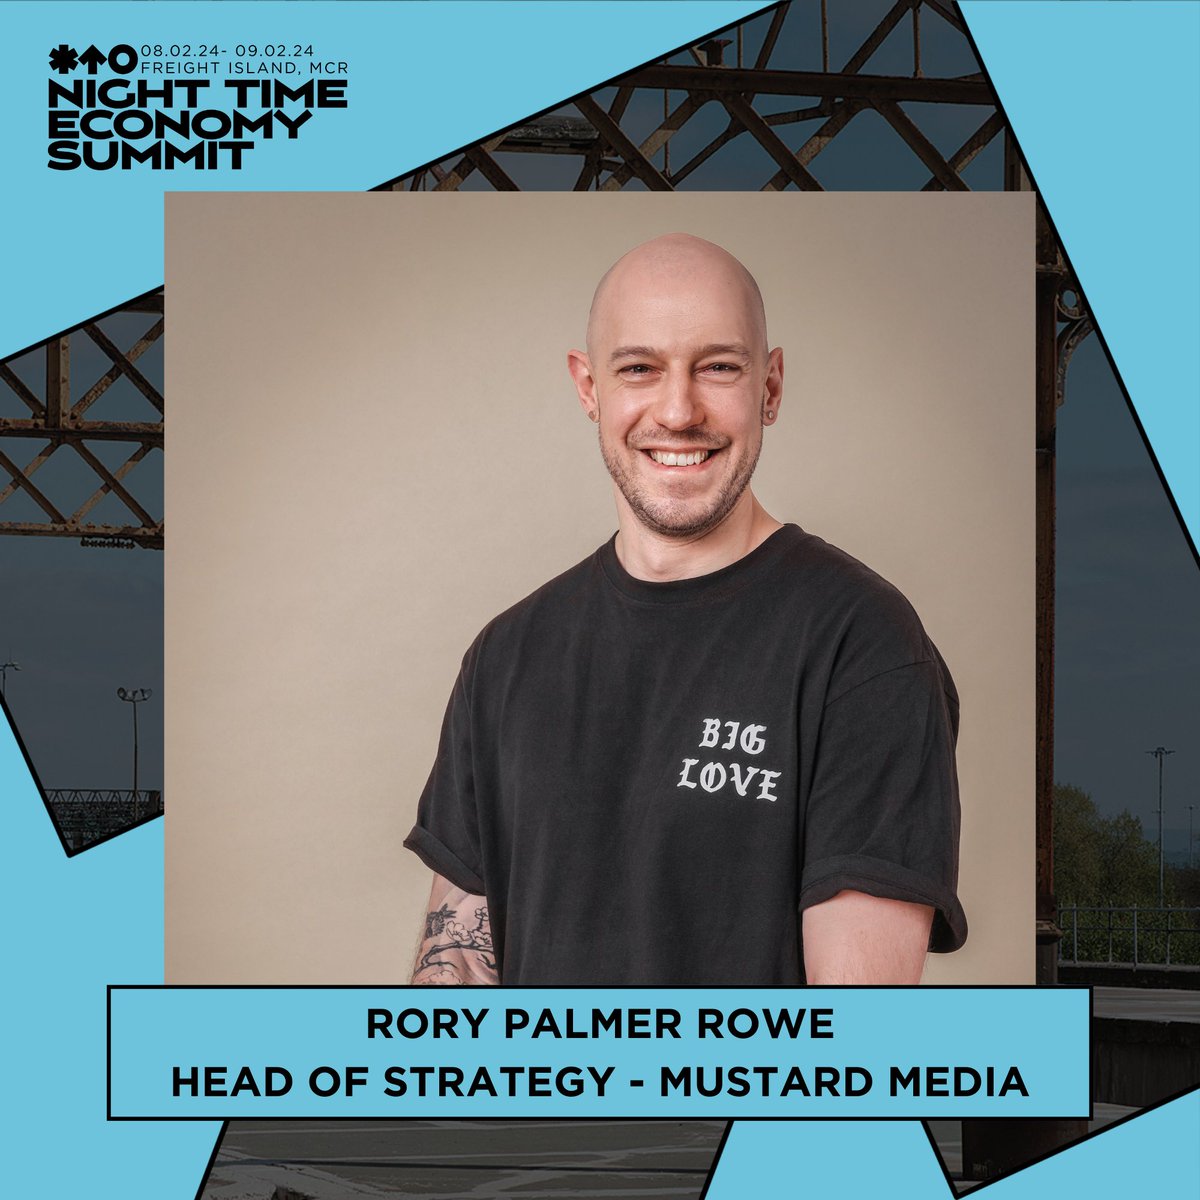 Our Head of Strategy Rory Palmer Rowe will be taking to the stage at the Night Time Economy Summit to discuss a hot topic, 'The Business Case for Community Building and Engagement.' Catch Rory's session on Thursday 8th Feb, tickets available from @wearethentia